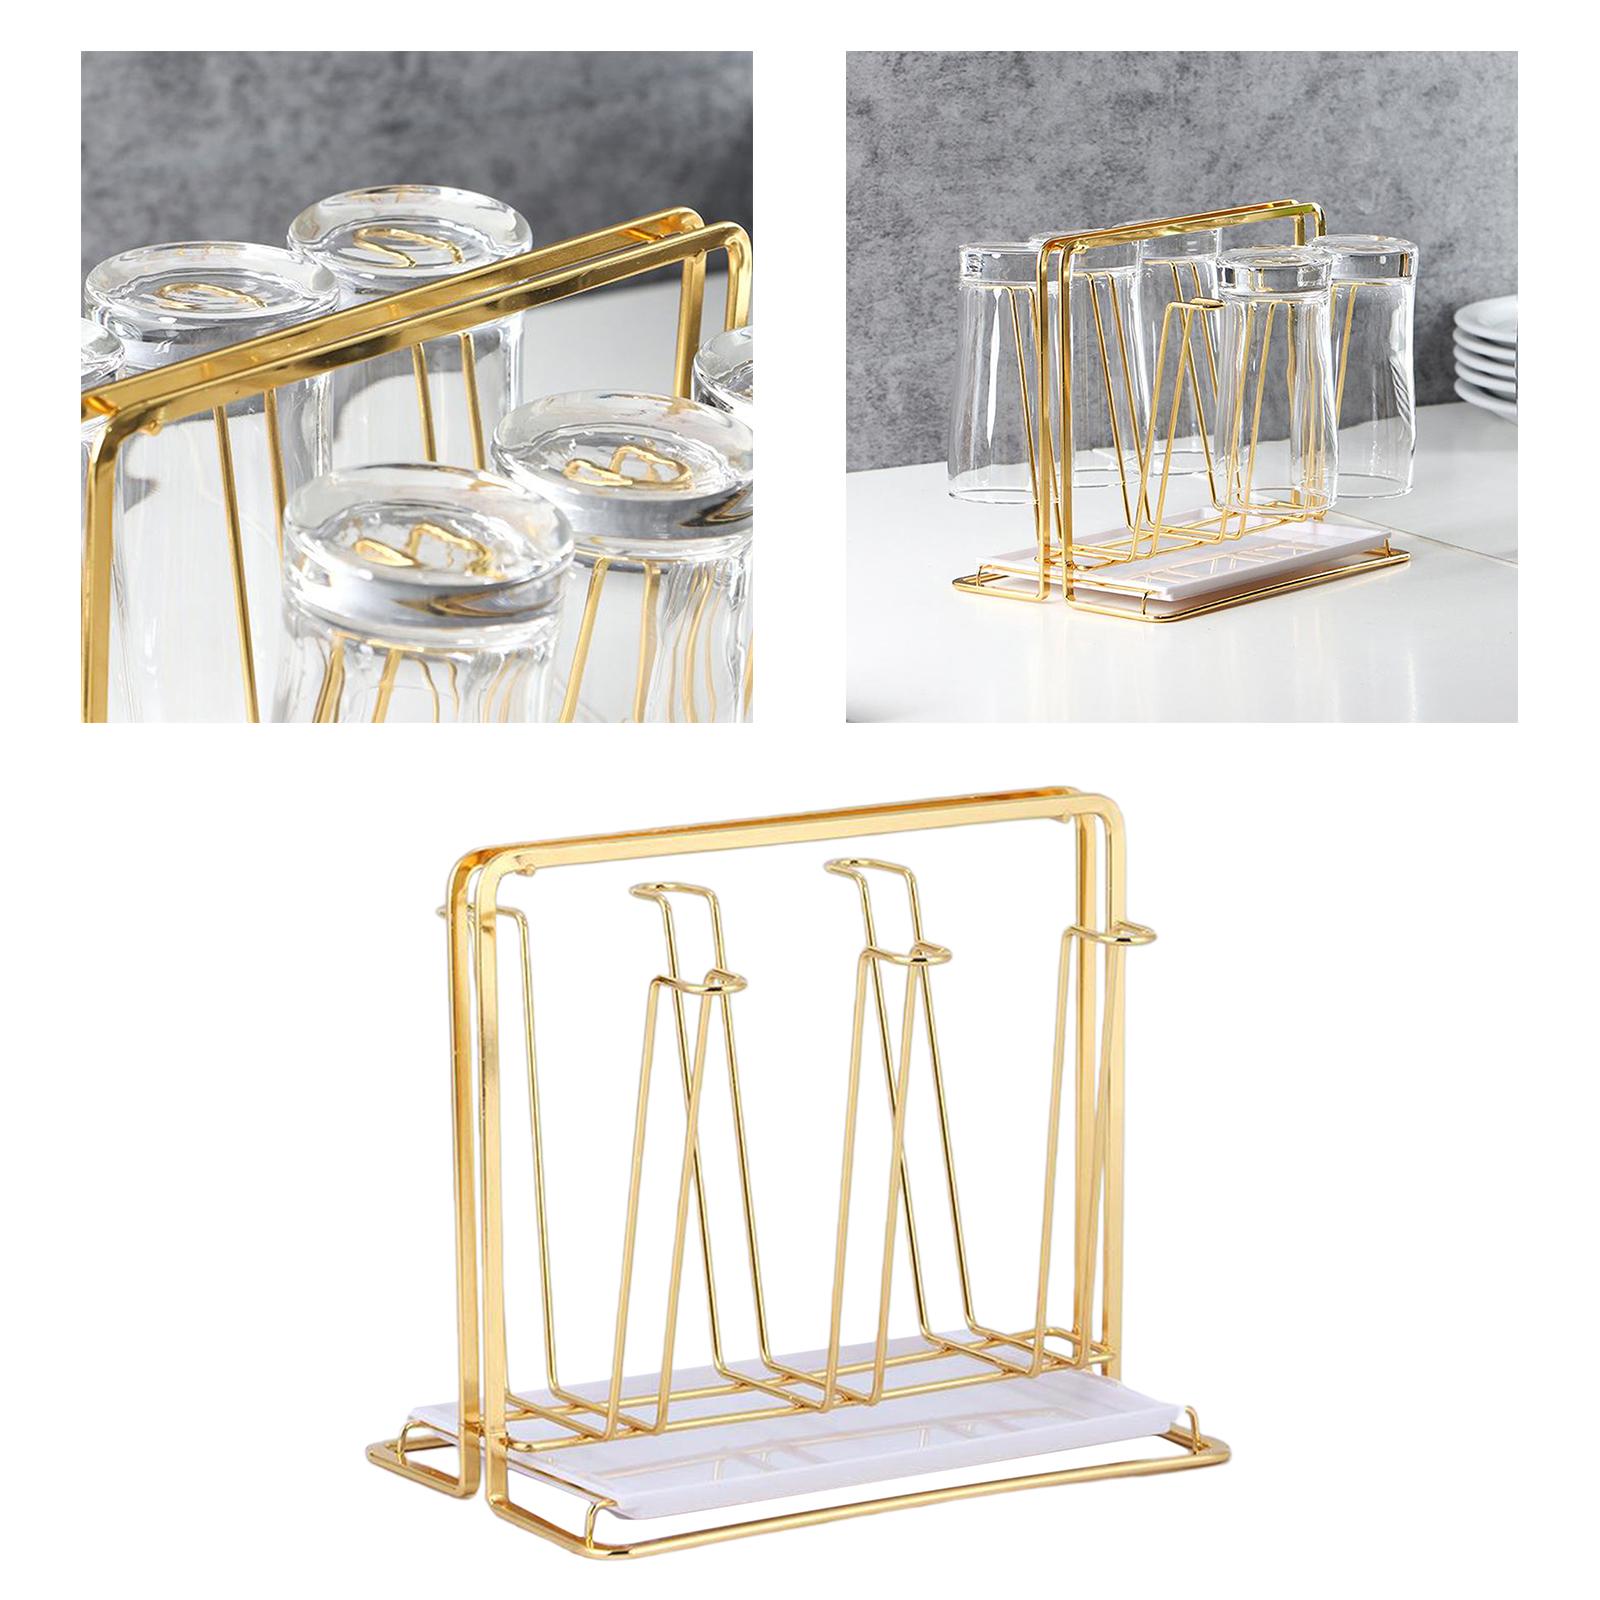 Minimalist Golden Cup Drying Rack Stand Iron 6 Cup Hooks Drainer Holder Tree for Mugs Glasses Bottles Home Kitchen Storage Organizer